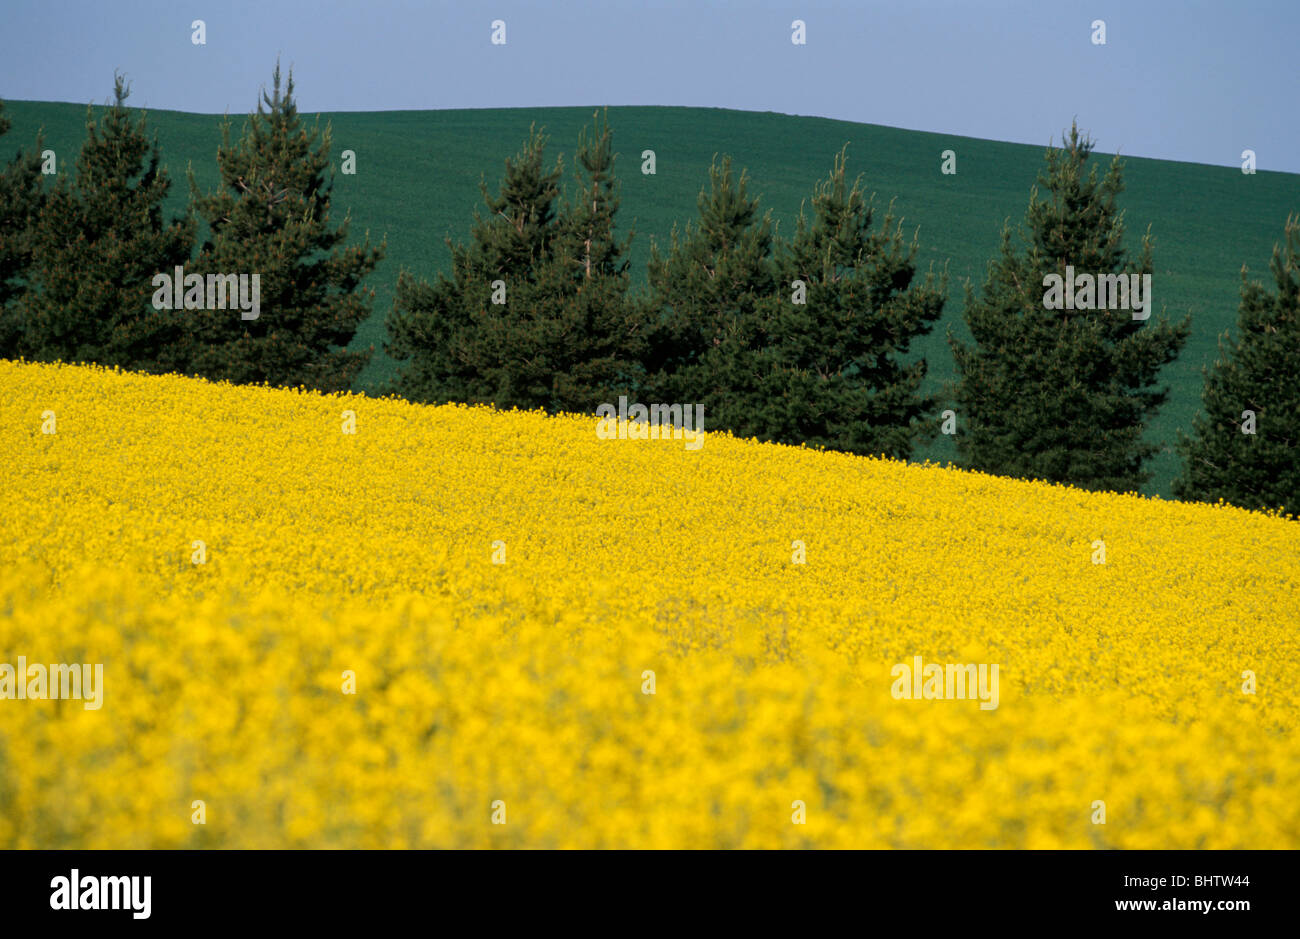 Canola Crop Harden District New South Wales Australia Stock Photo